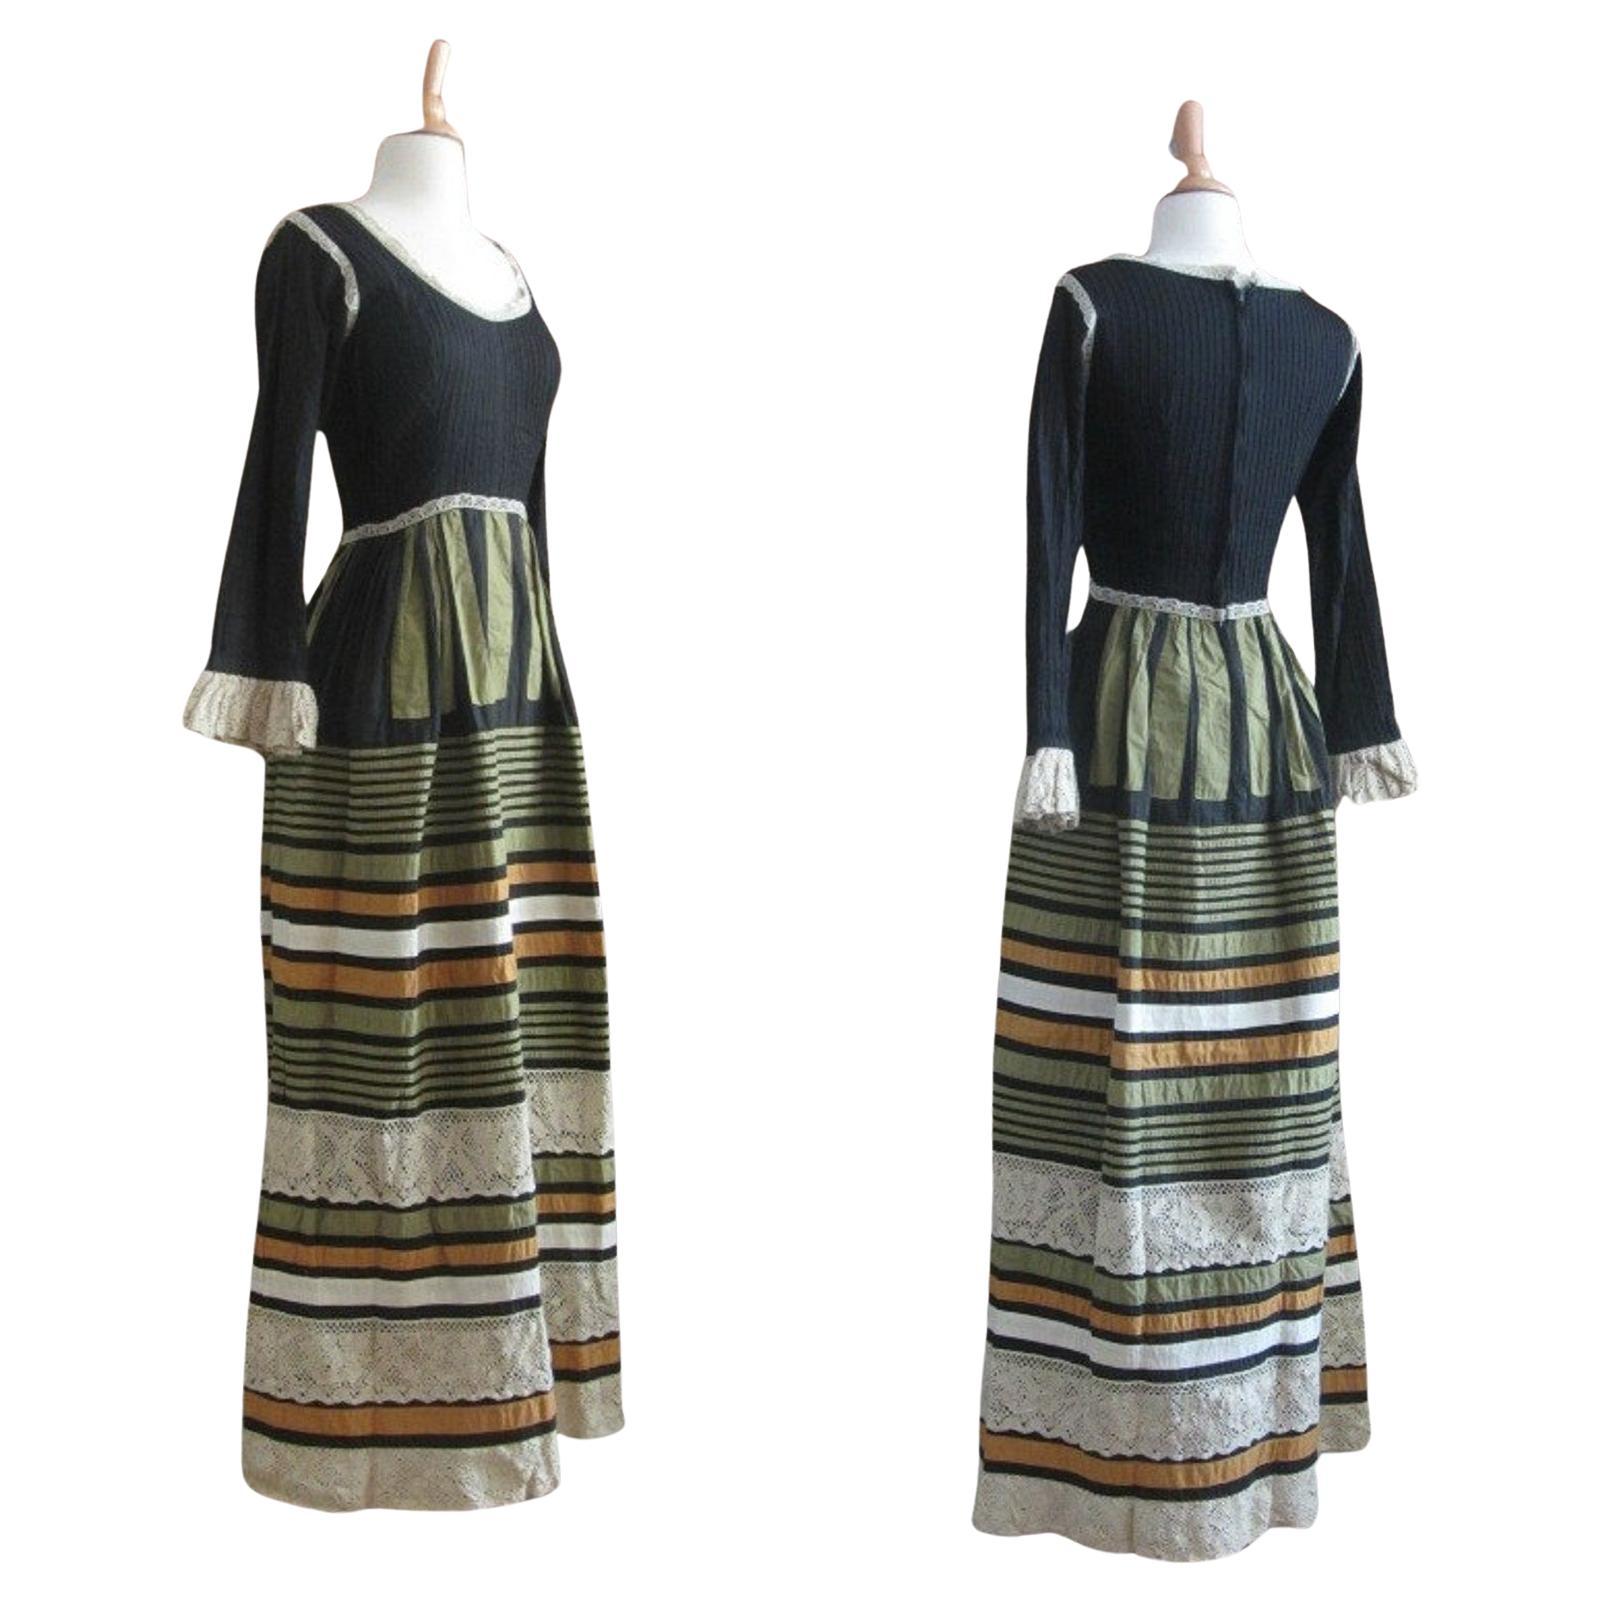 Georgia Charuhas Bohemian Mexican Maxi Dress, Circa 1970s In Excellent Condition For Sale In Brooklyn, NY